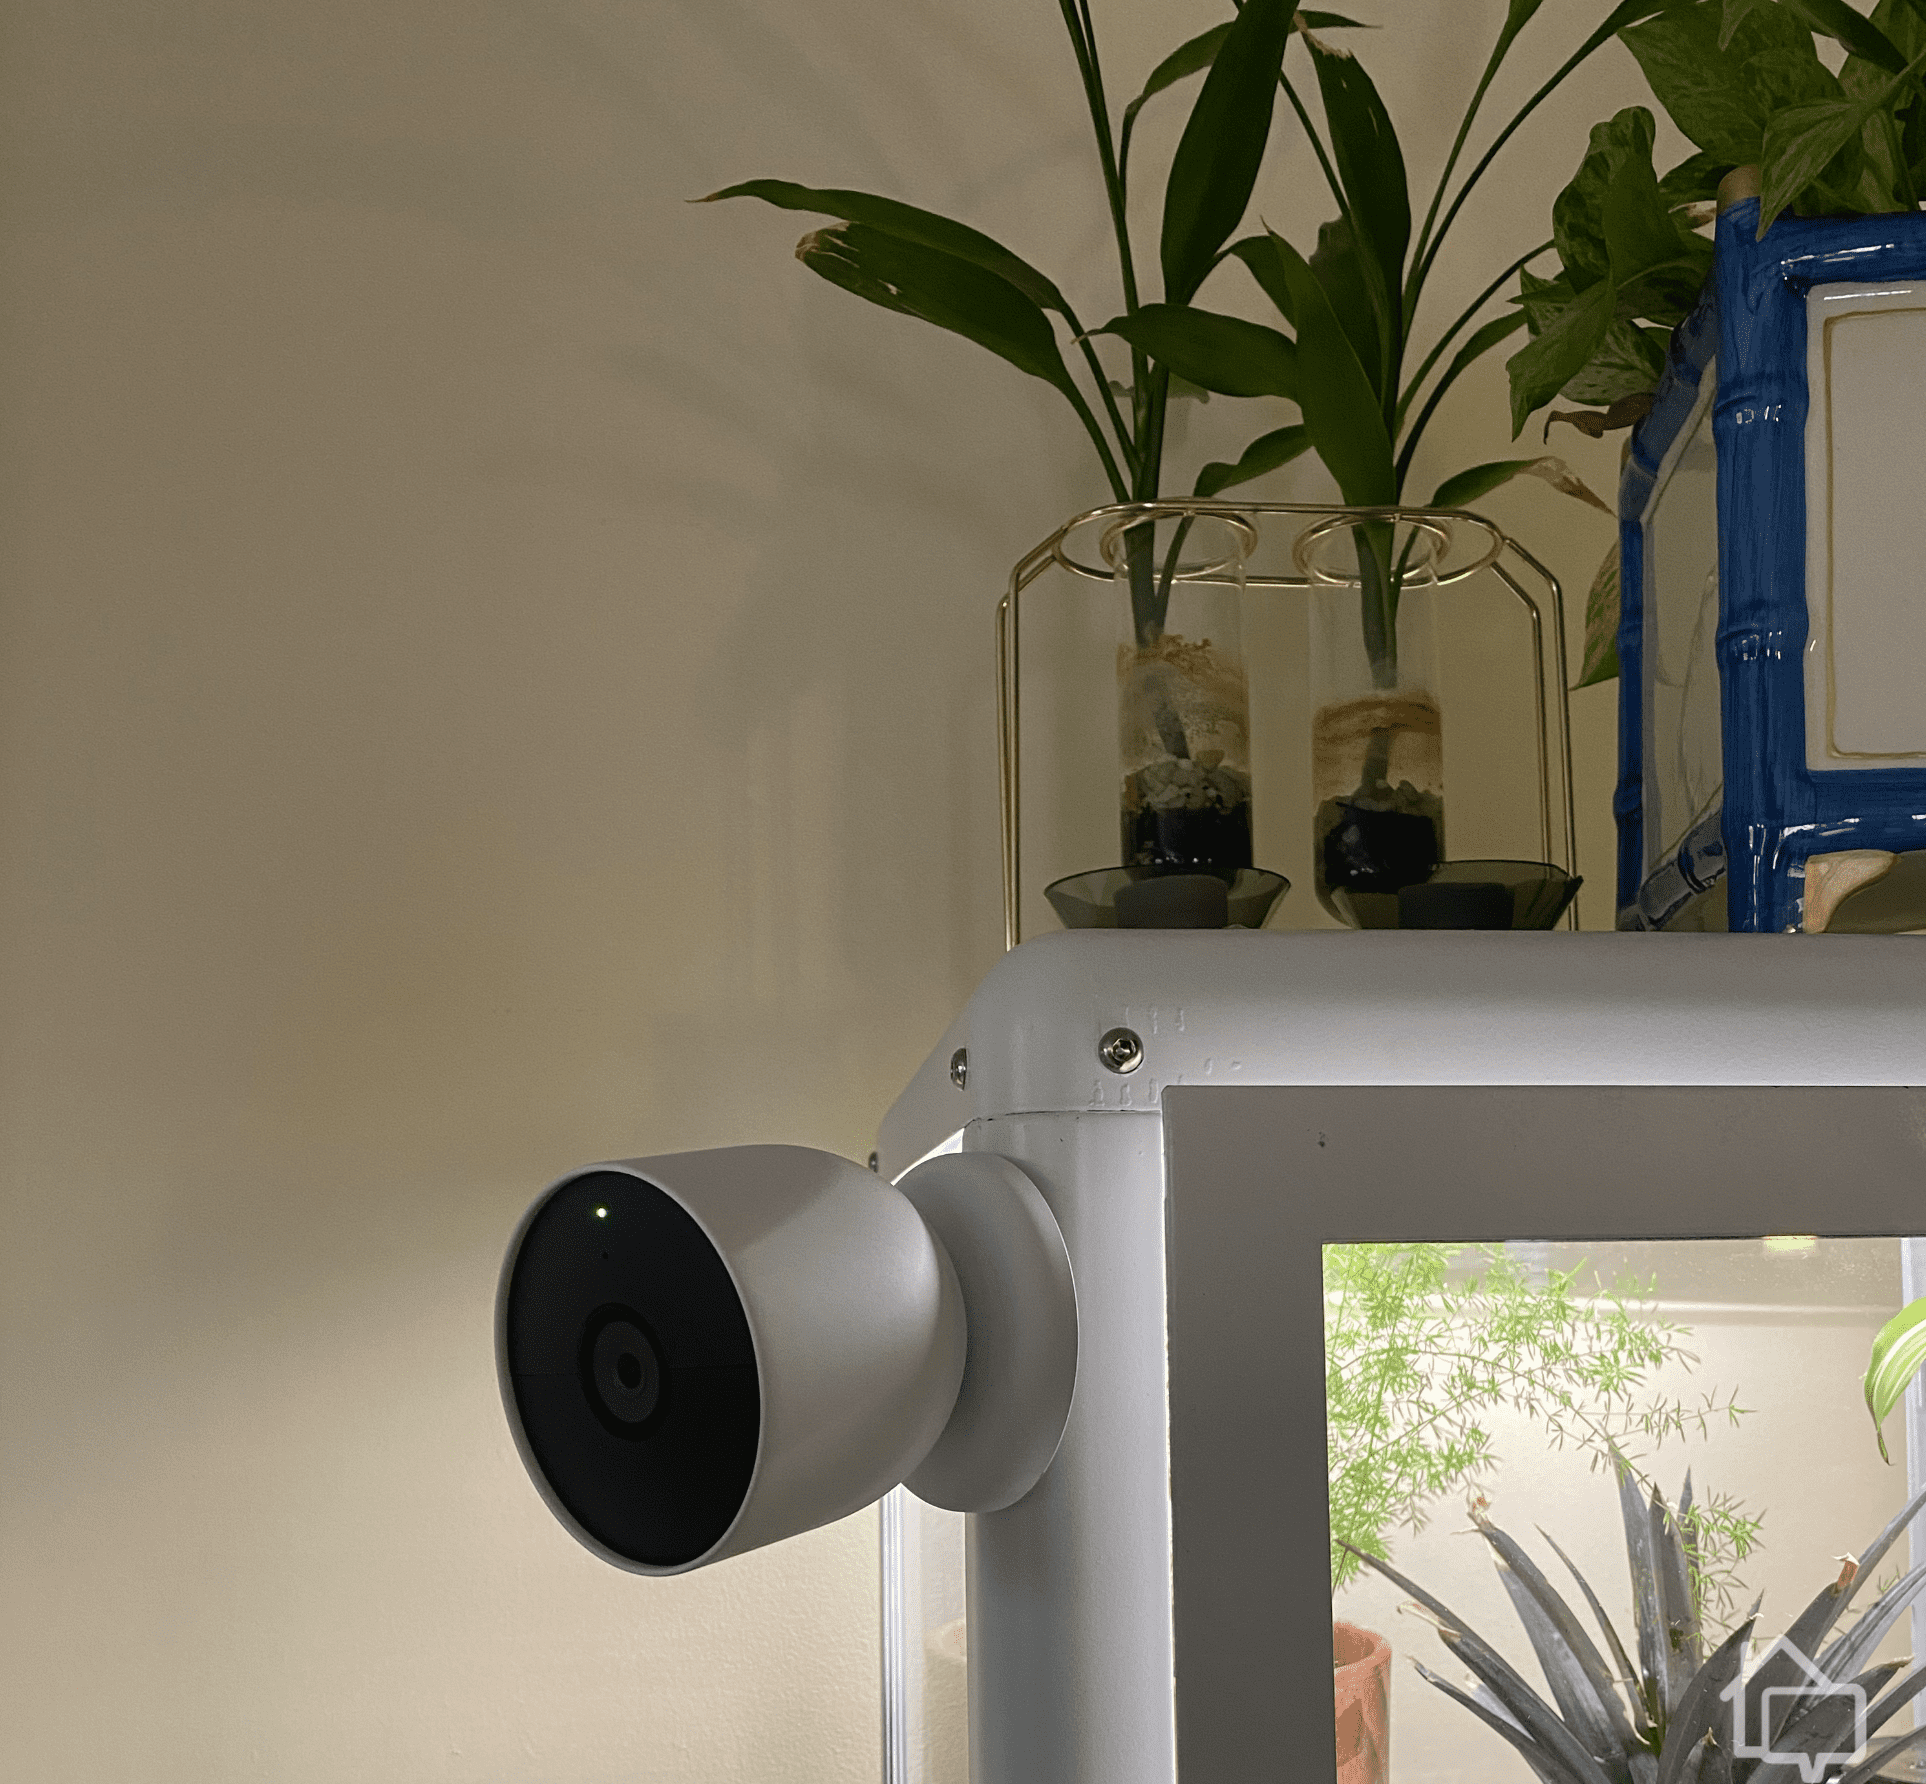 Google Nest Cams will start charging 25%-33% more per month to record video